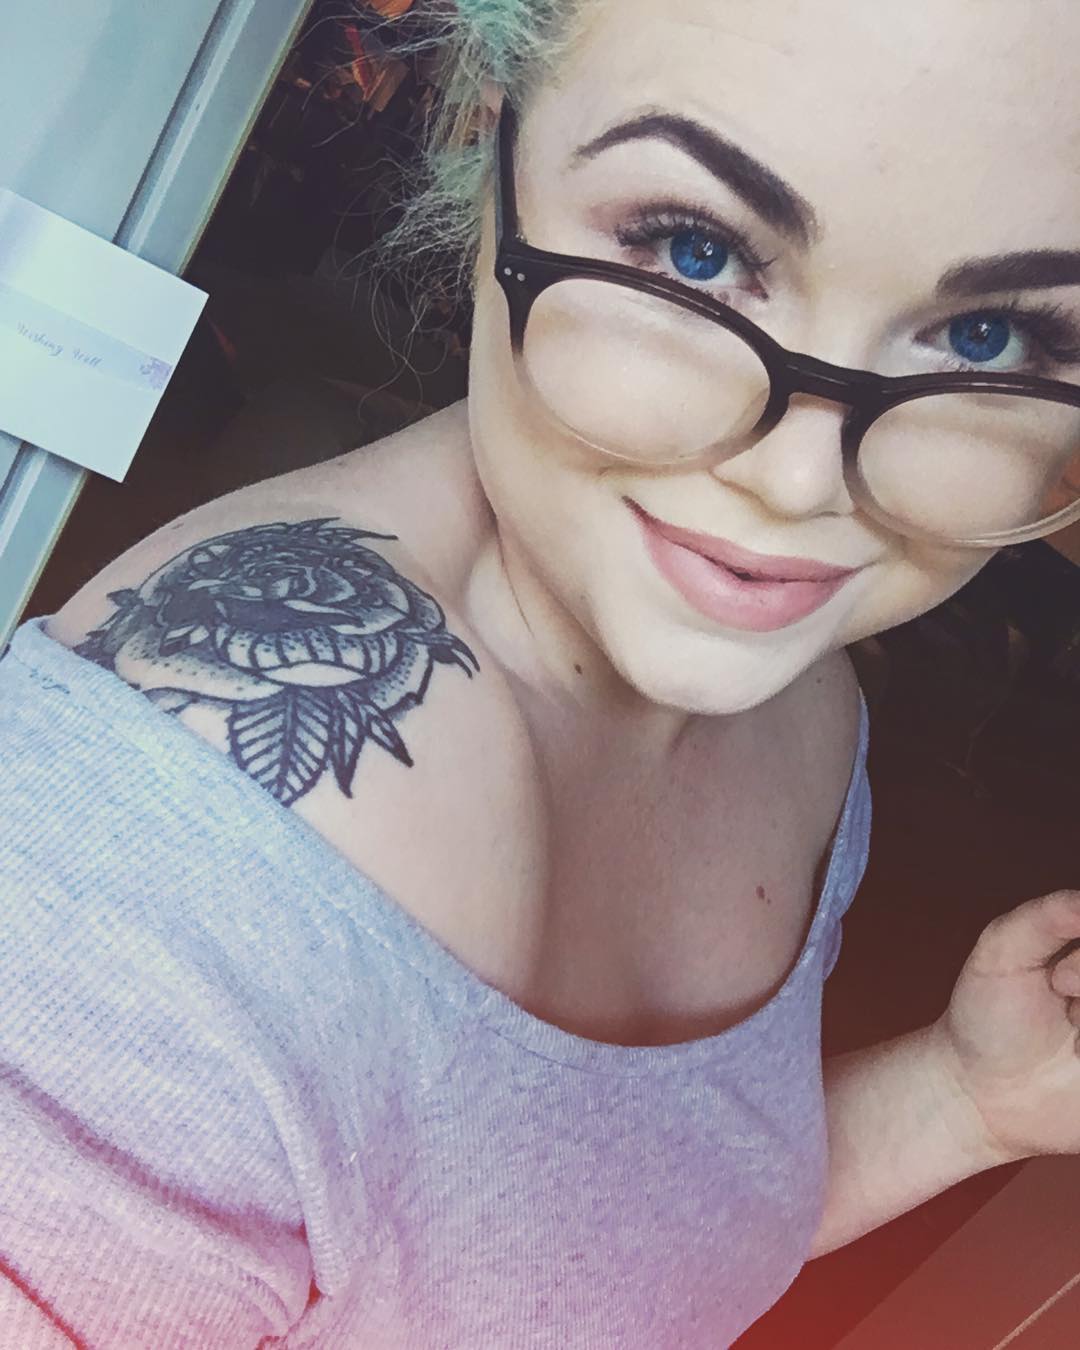 Girl with glasses shows off her rose shoulder tattoo